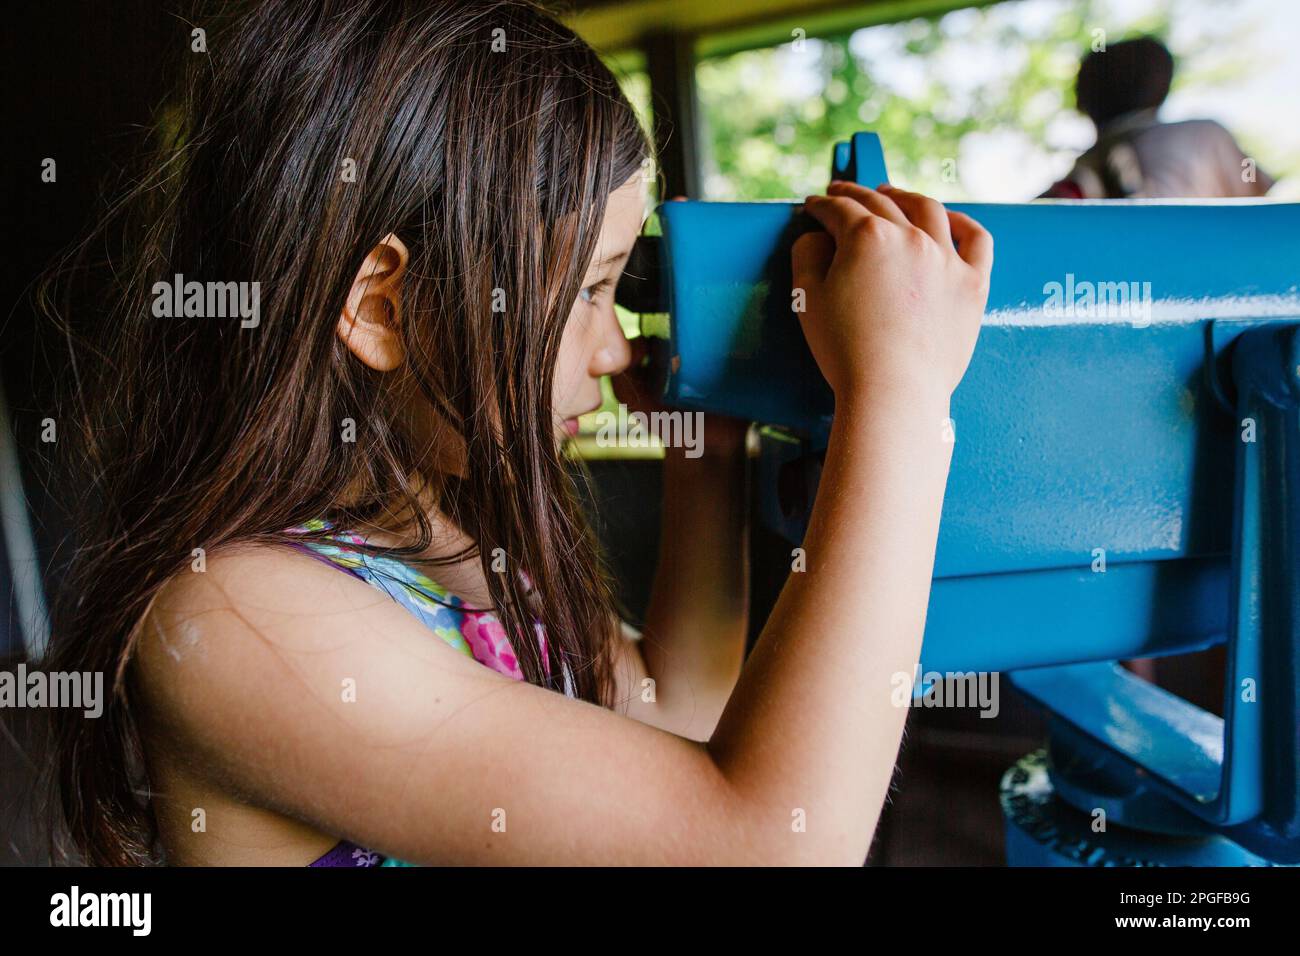 Side-view of a girl studying nature through large binoculars Stock Photo